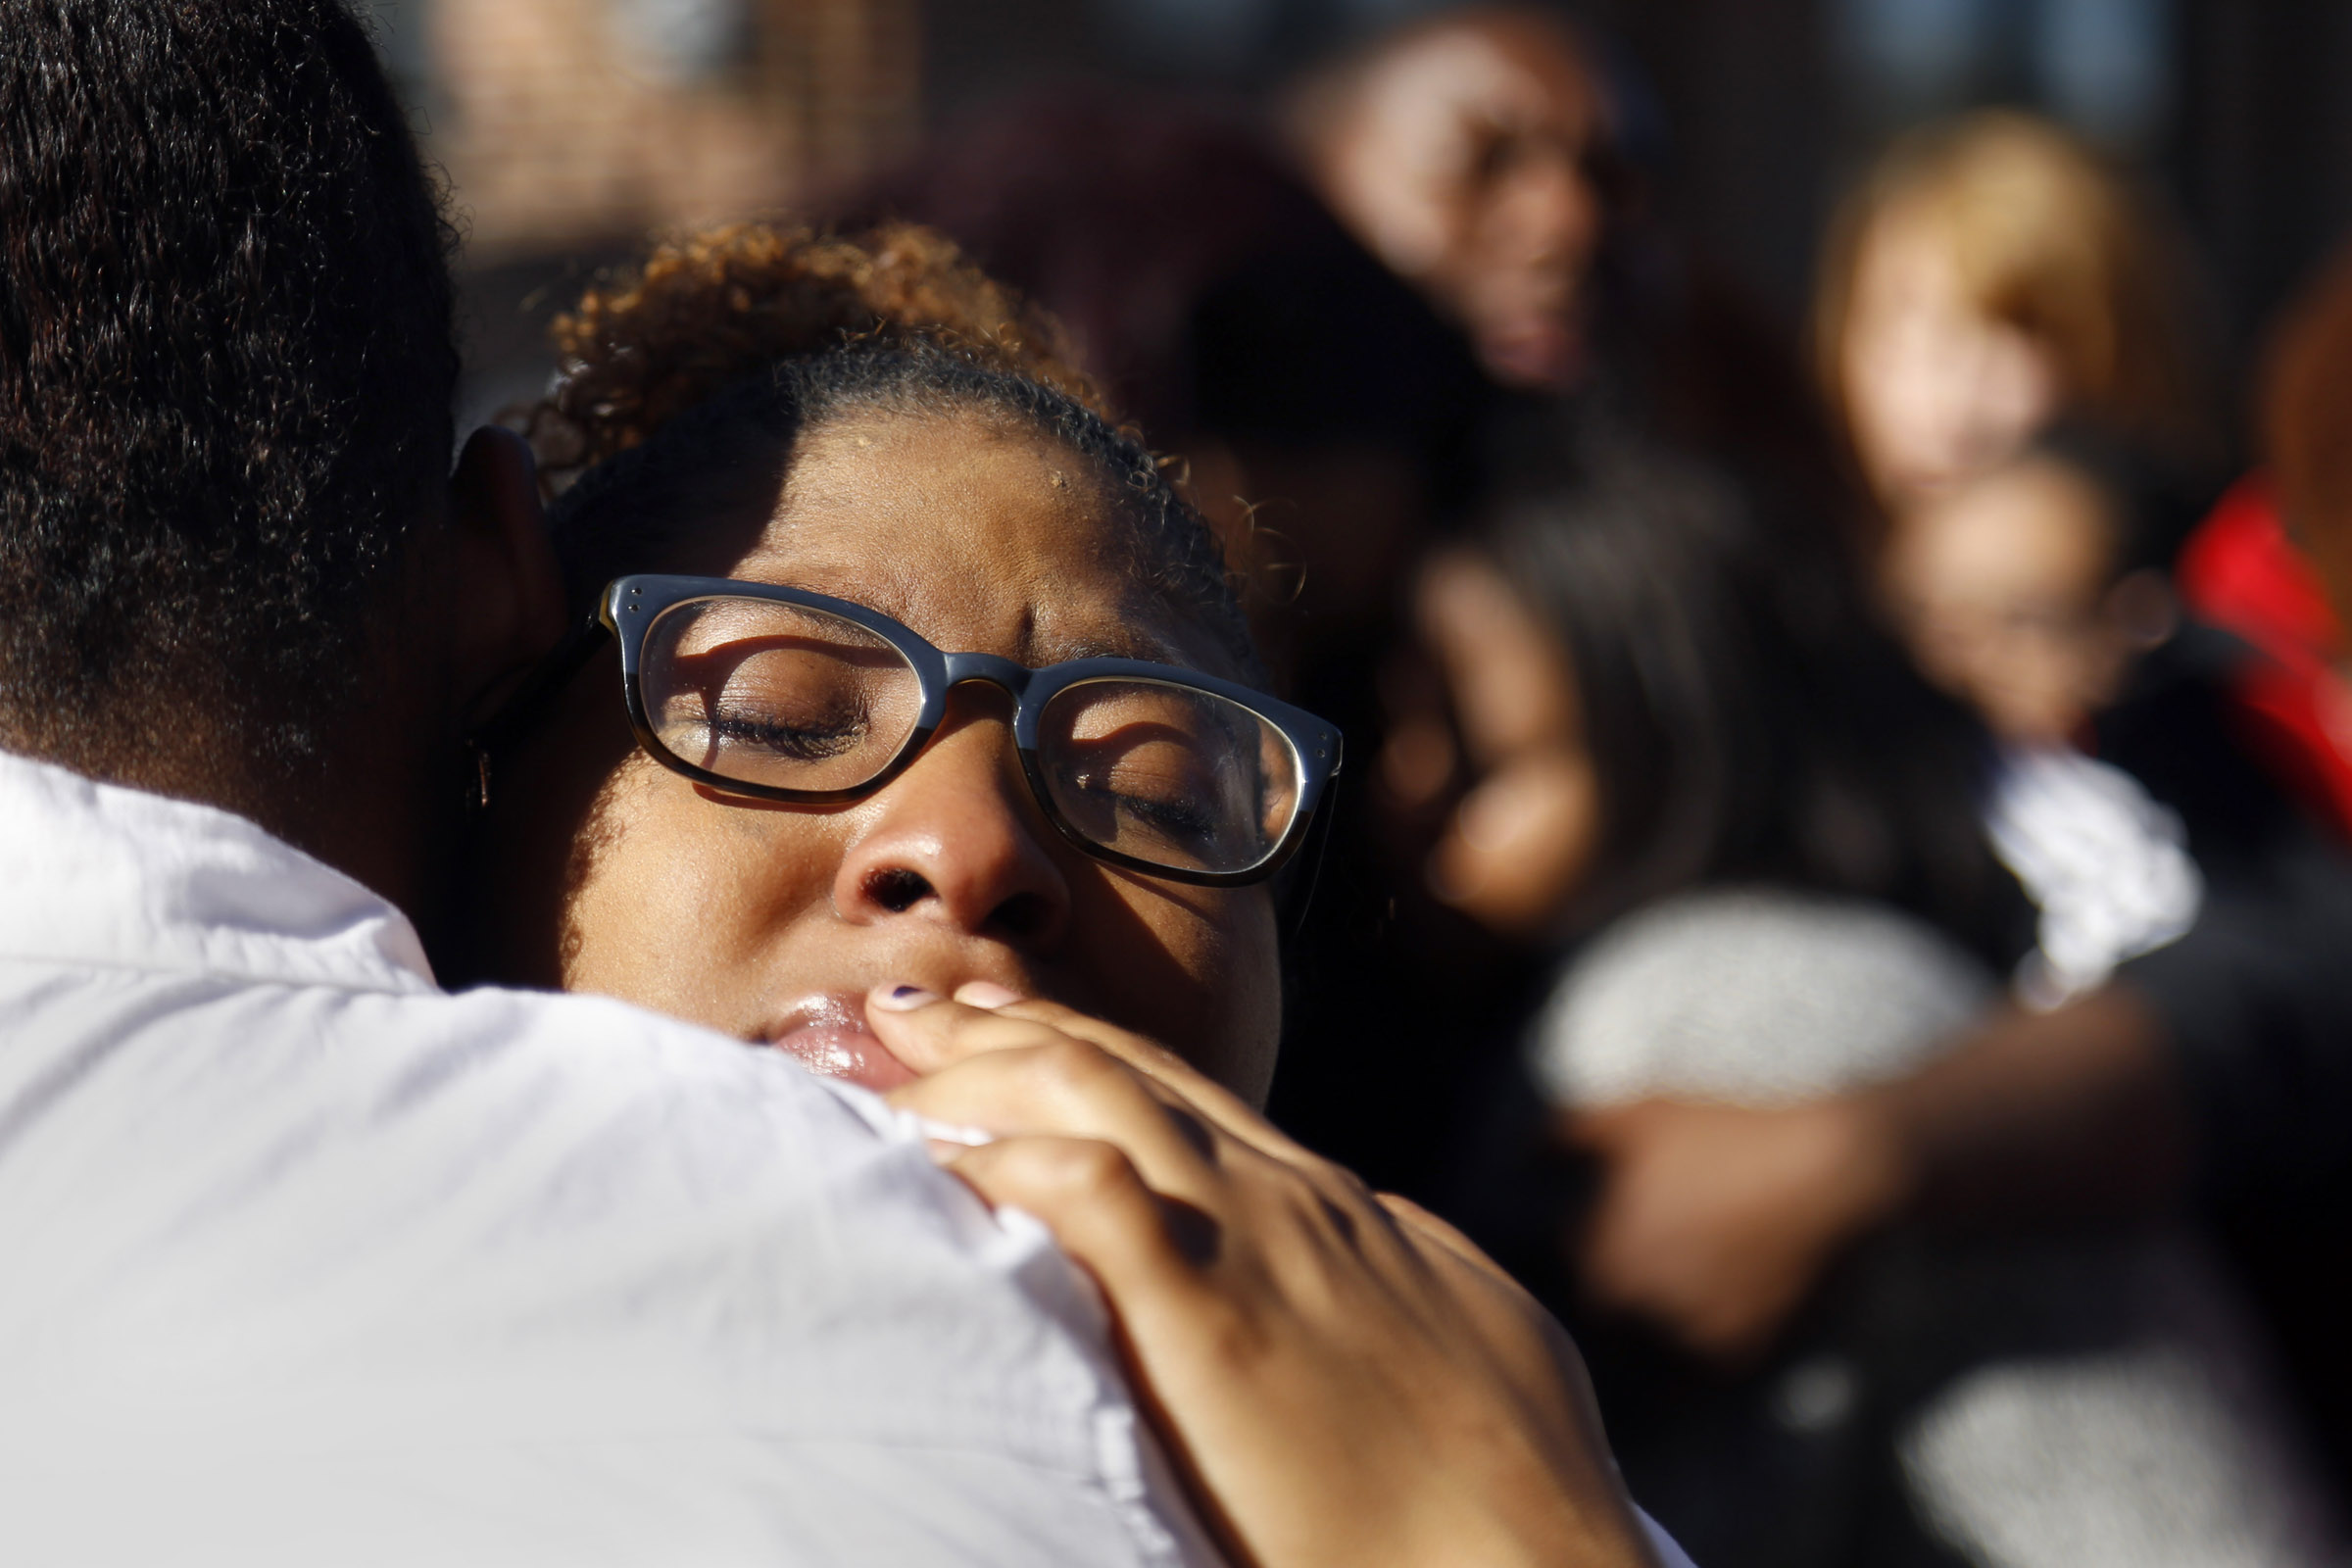 PHOTO: A member of Concerned Student 1950 hugs a fellow protestor after the group prayed together in front of the Reynolds Alumni Center on the University of Missouri campus in Columbia, Mo. on Nov. 7, 2015.